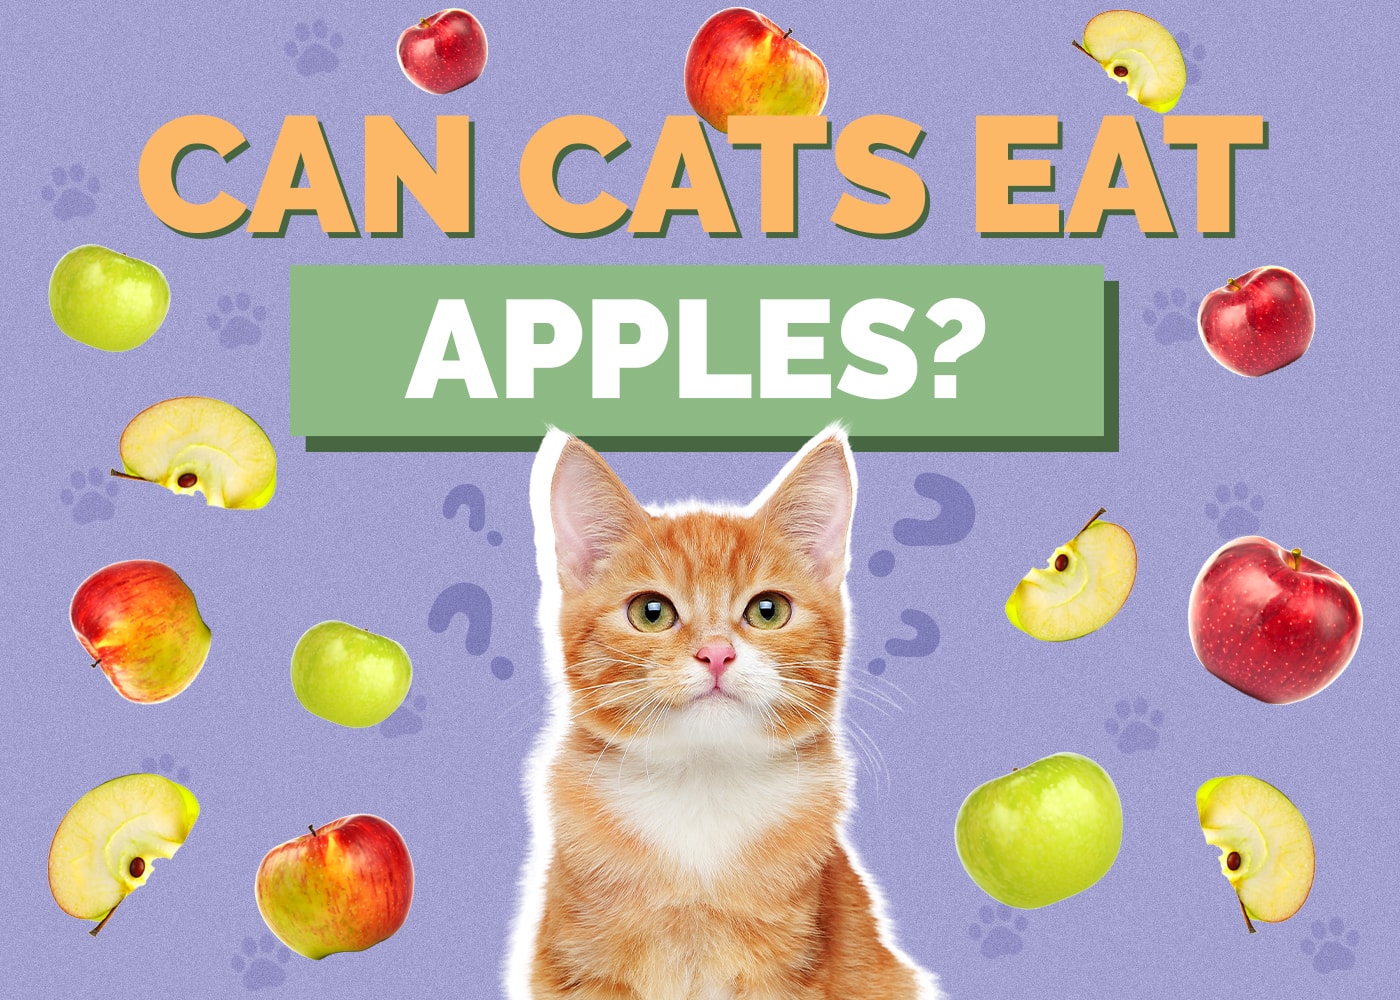 Can Cats Eat apples